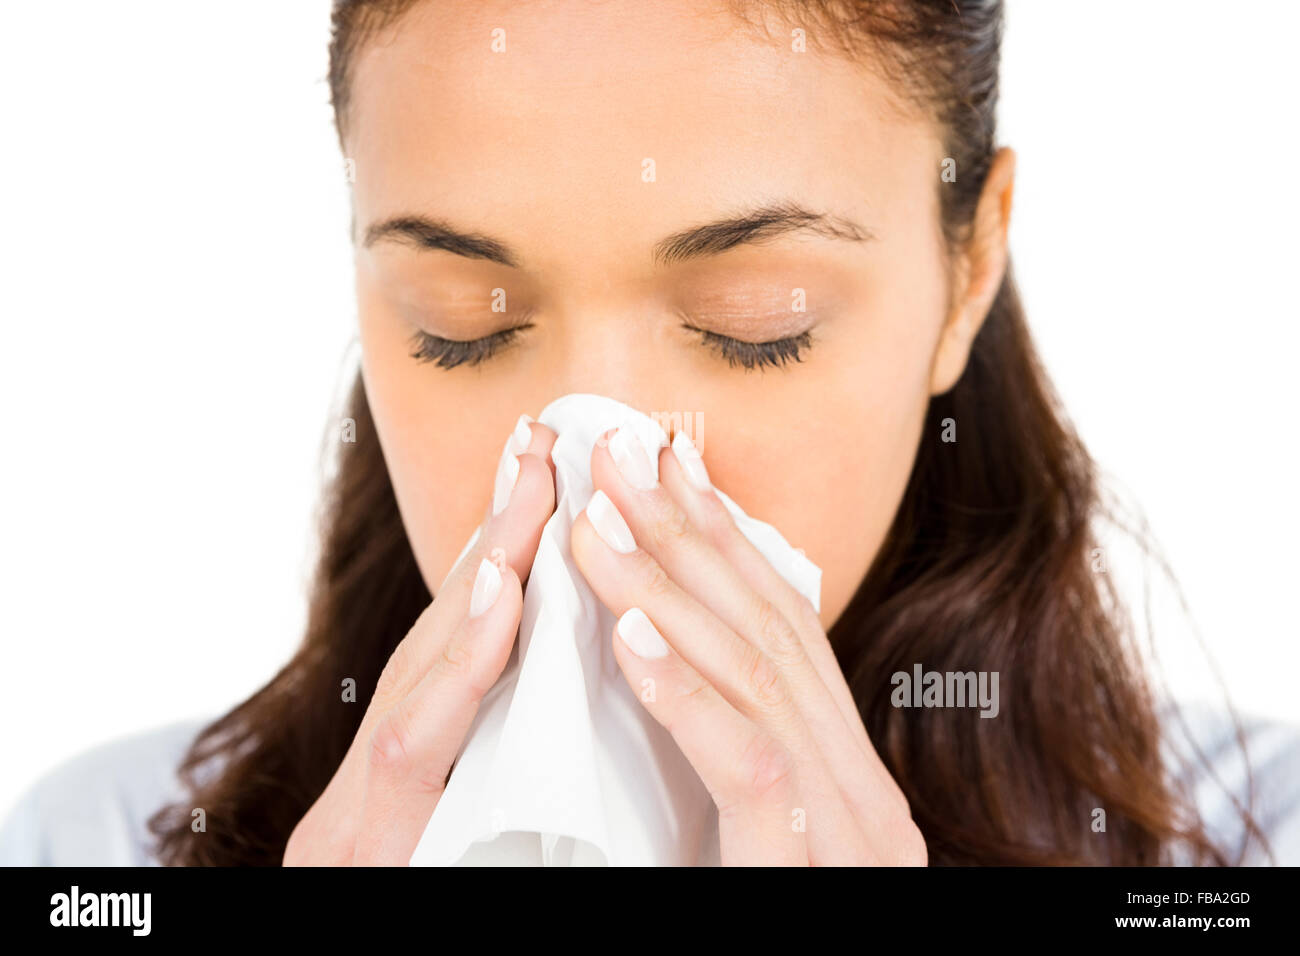 Woman blowing nose with tissue paper Stock Photo